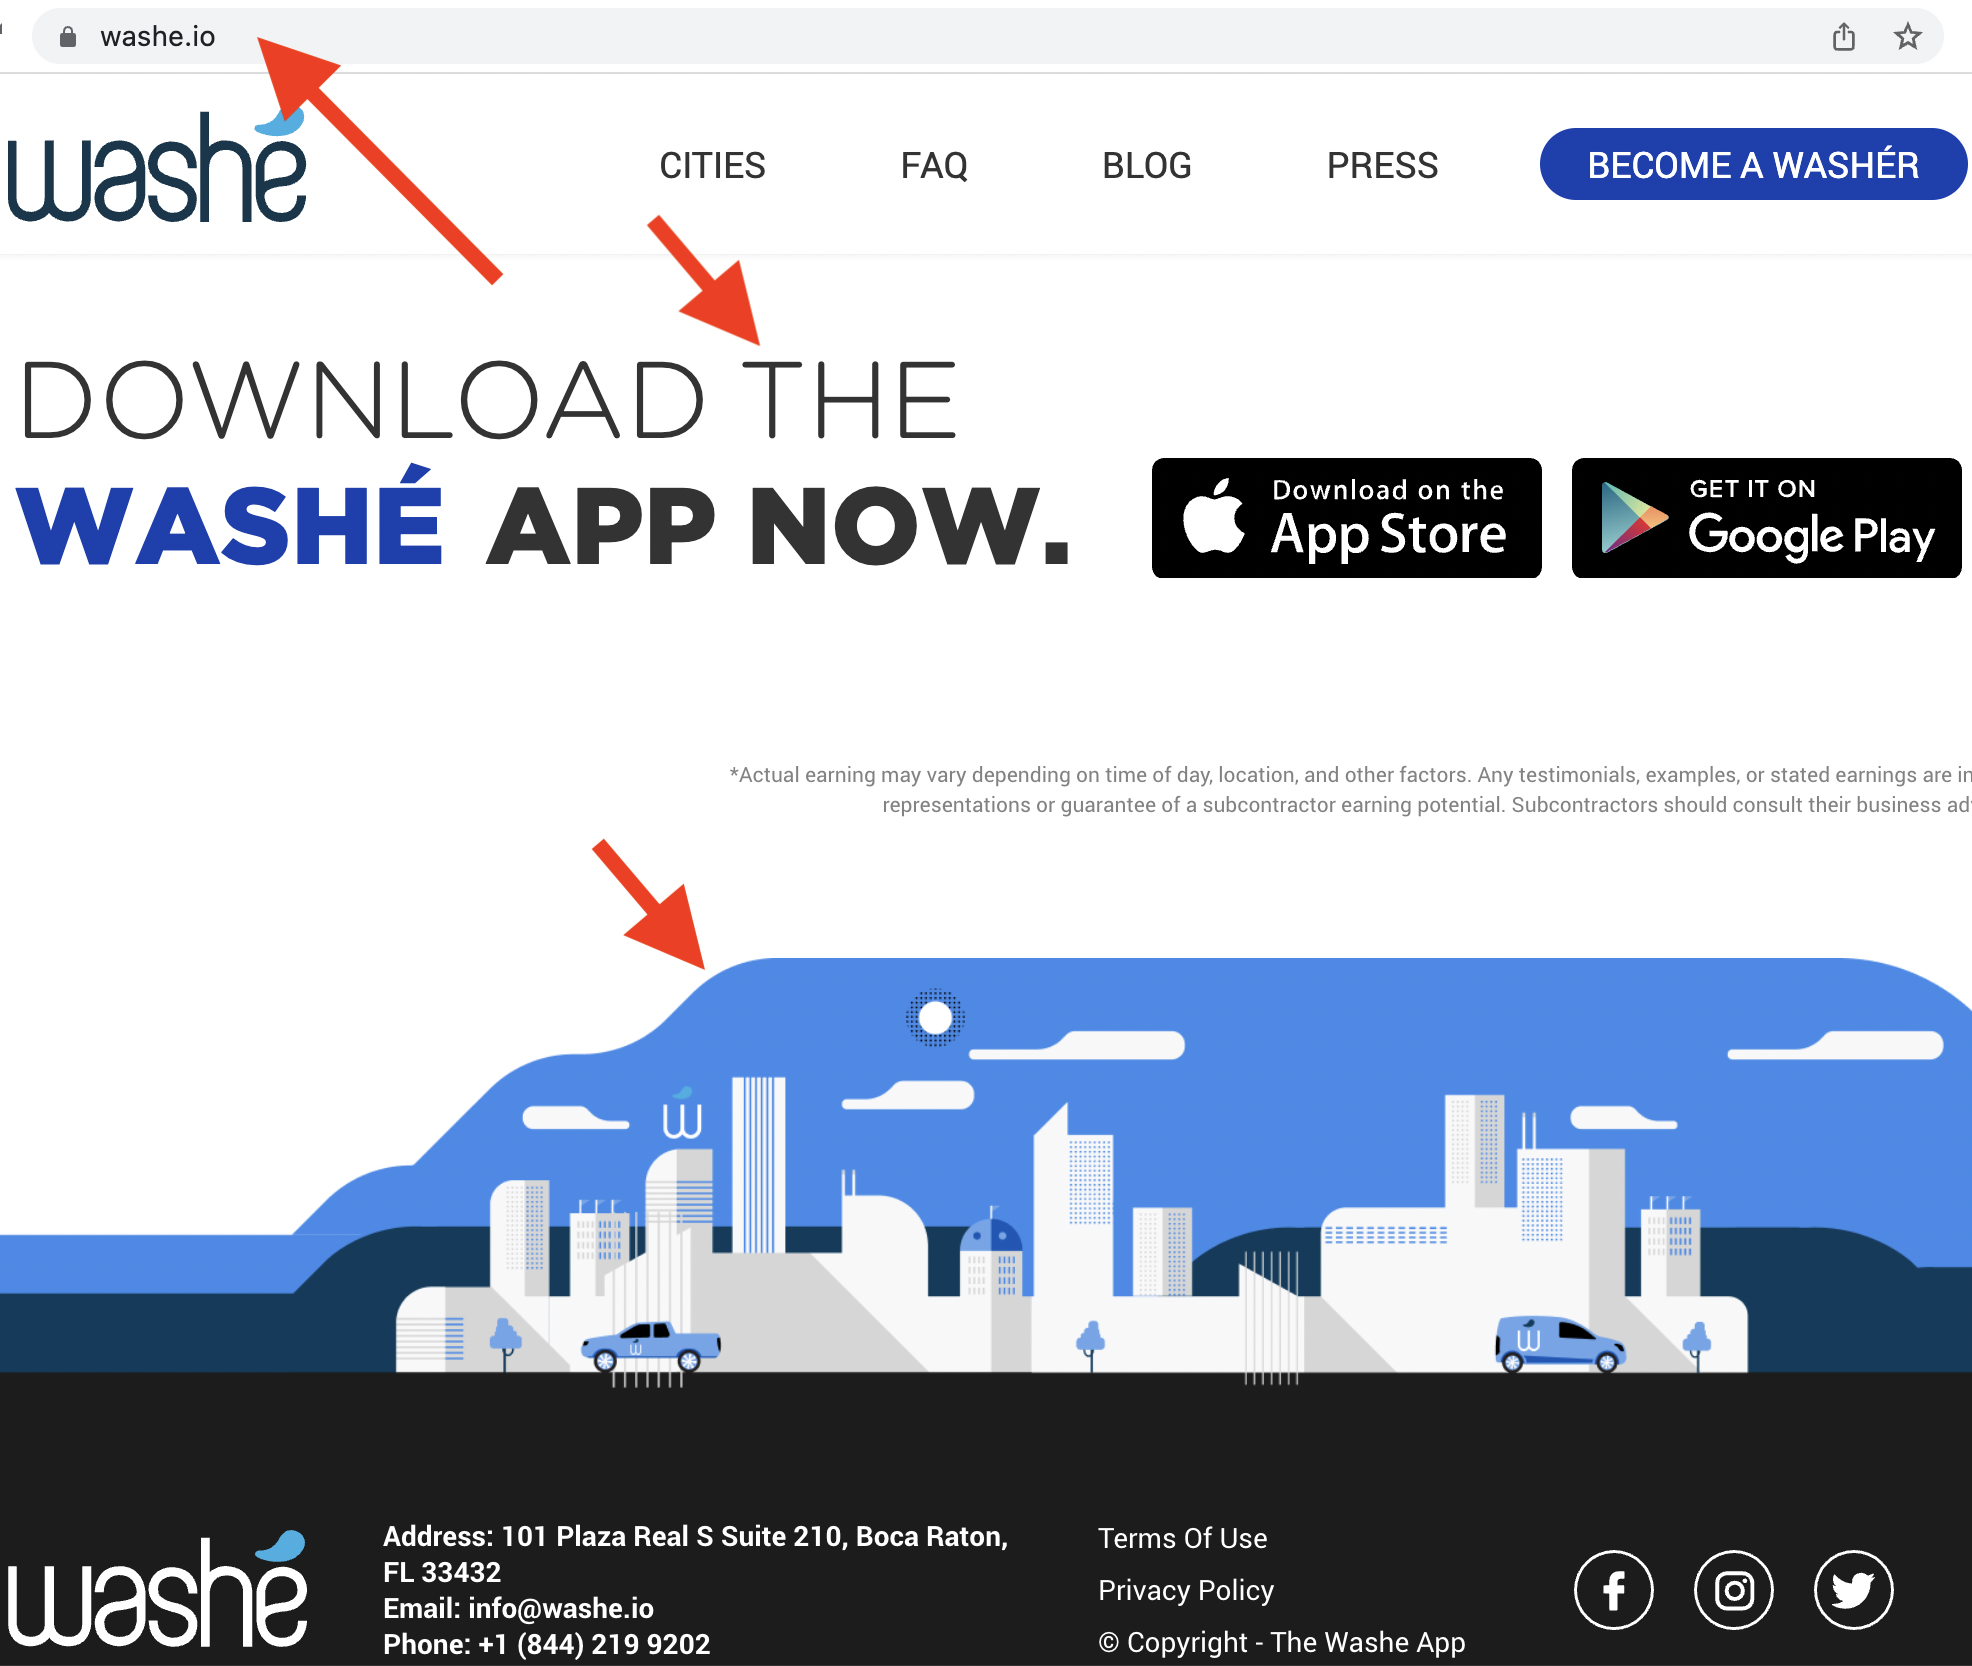 The original https://www.washe.io/ footer